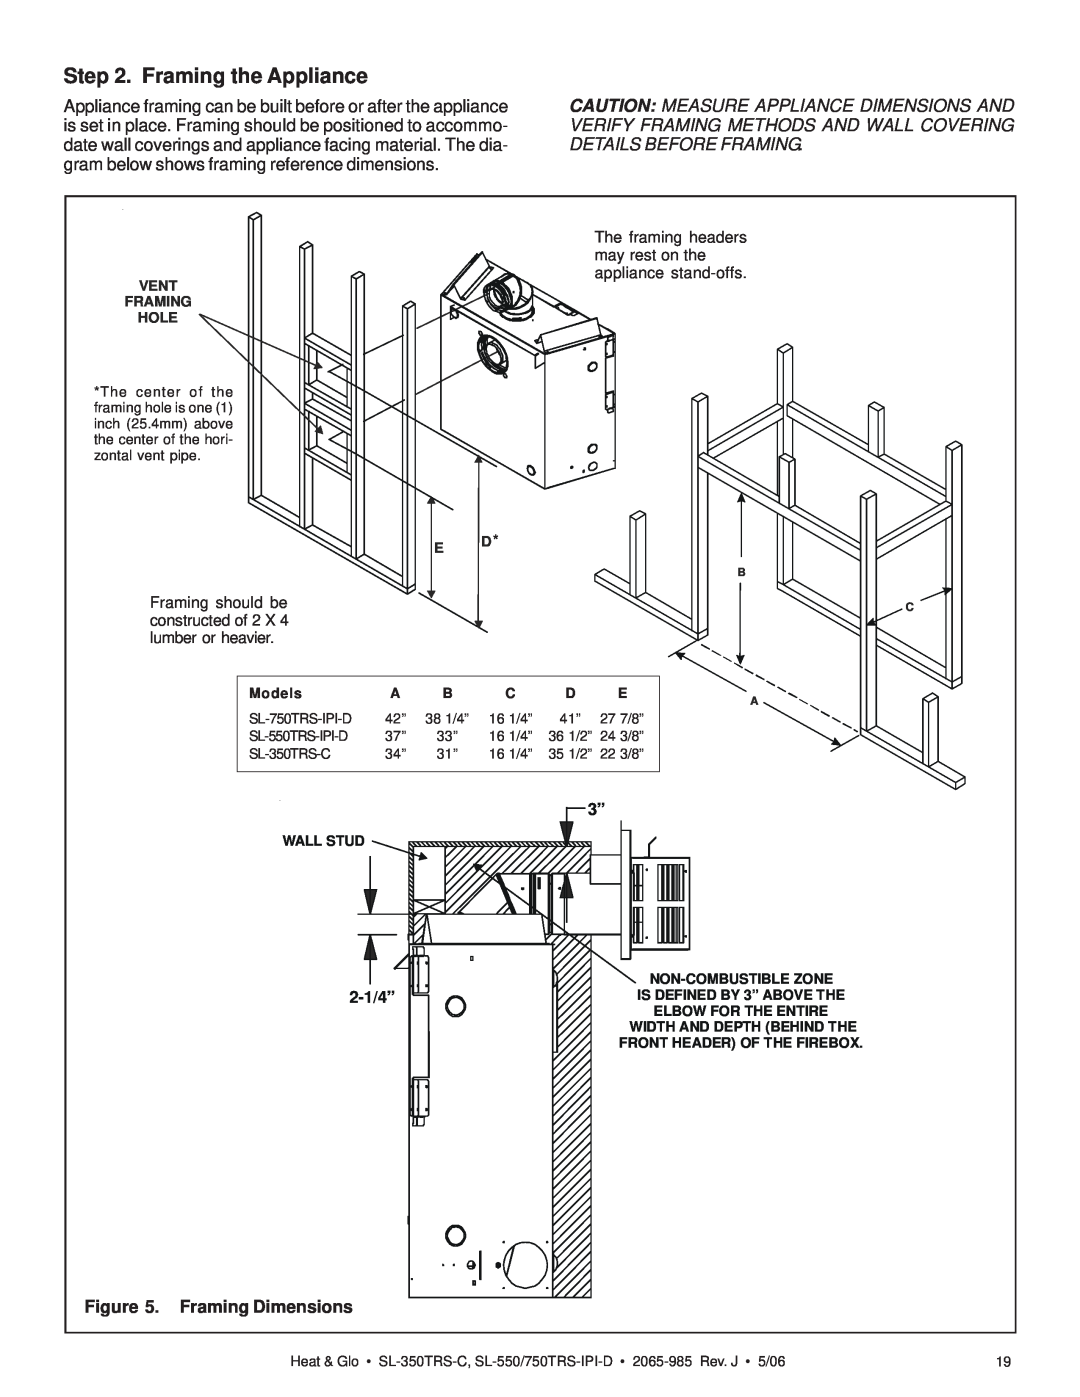 Heat & Glo LifeStyle SL-750TRS-IPI-D owner manual Framing the Appliance, Framing Dimensions 